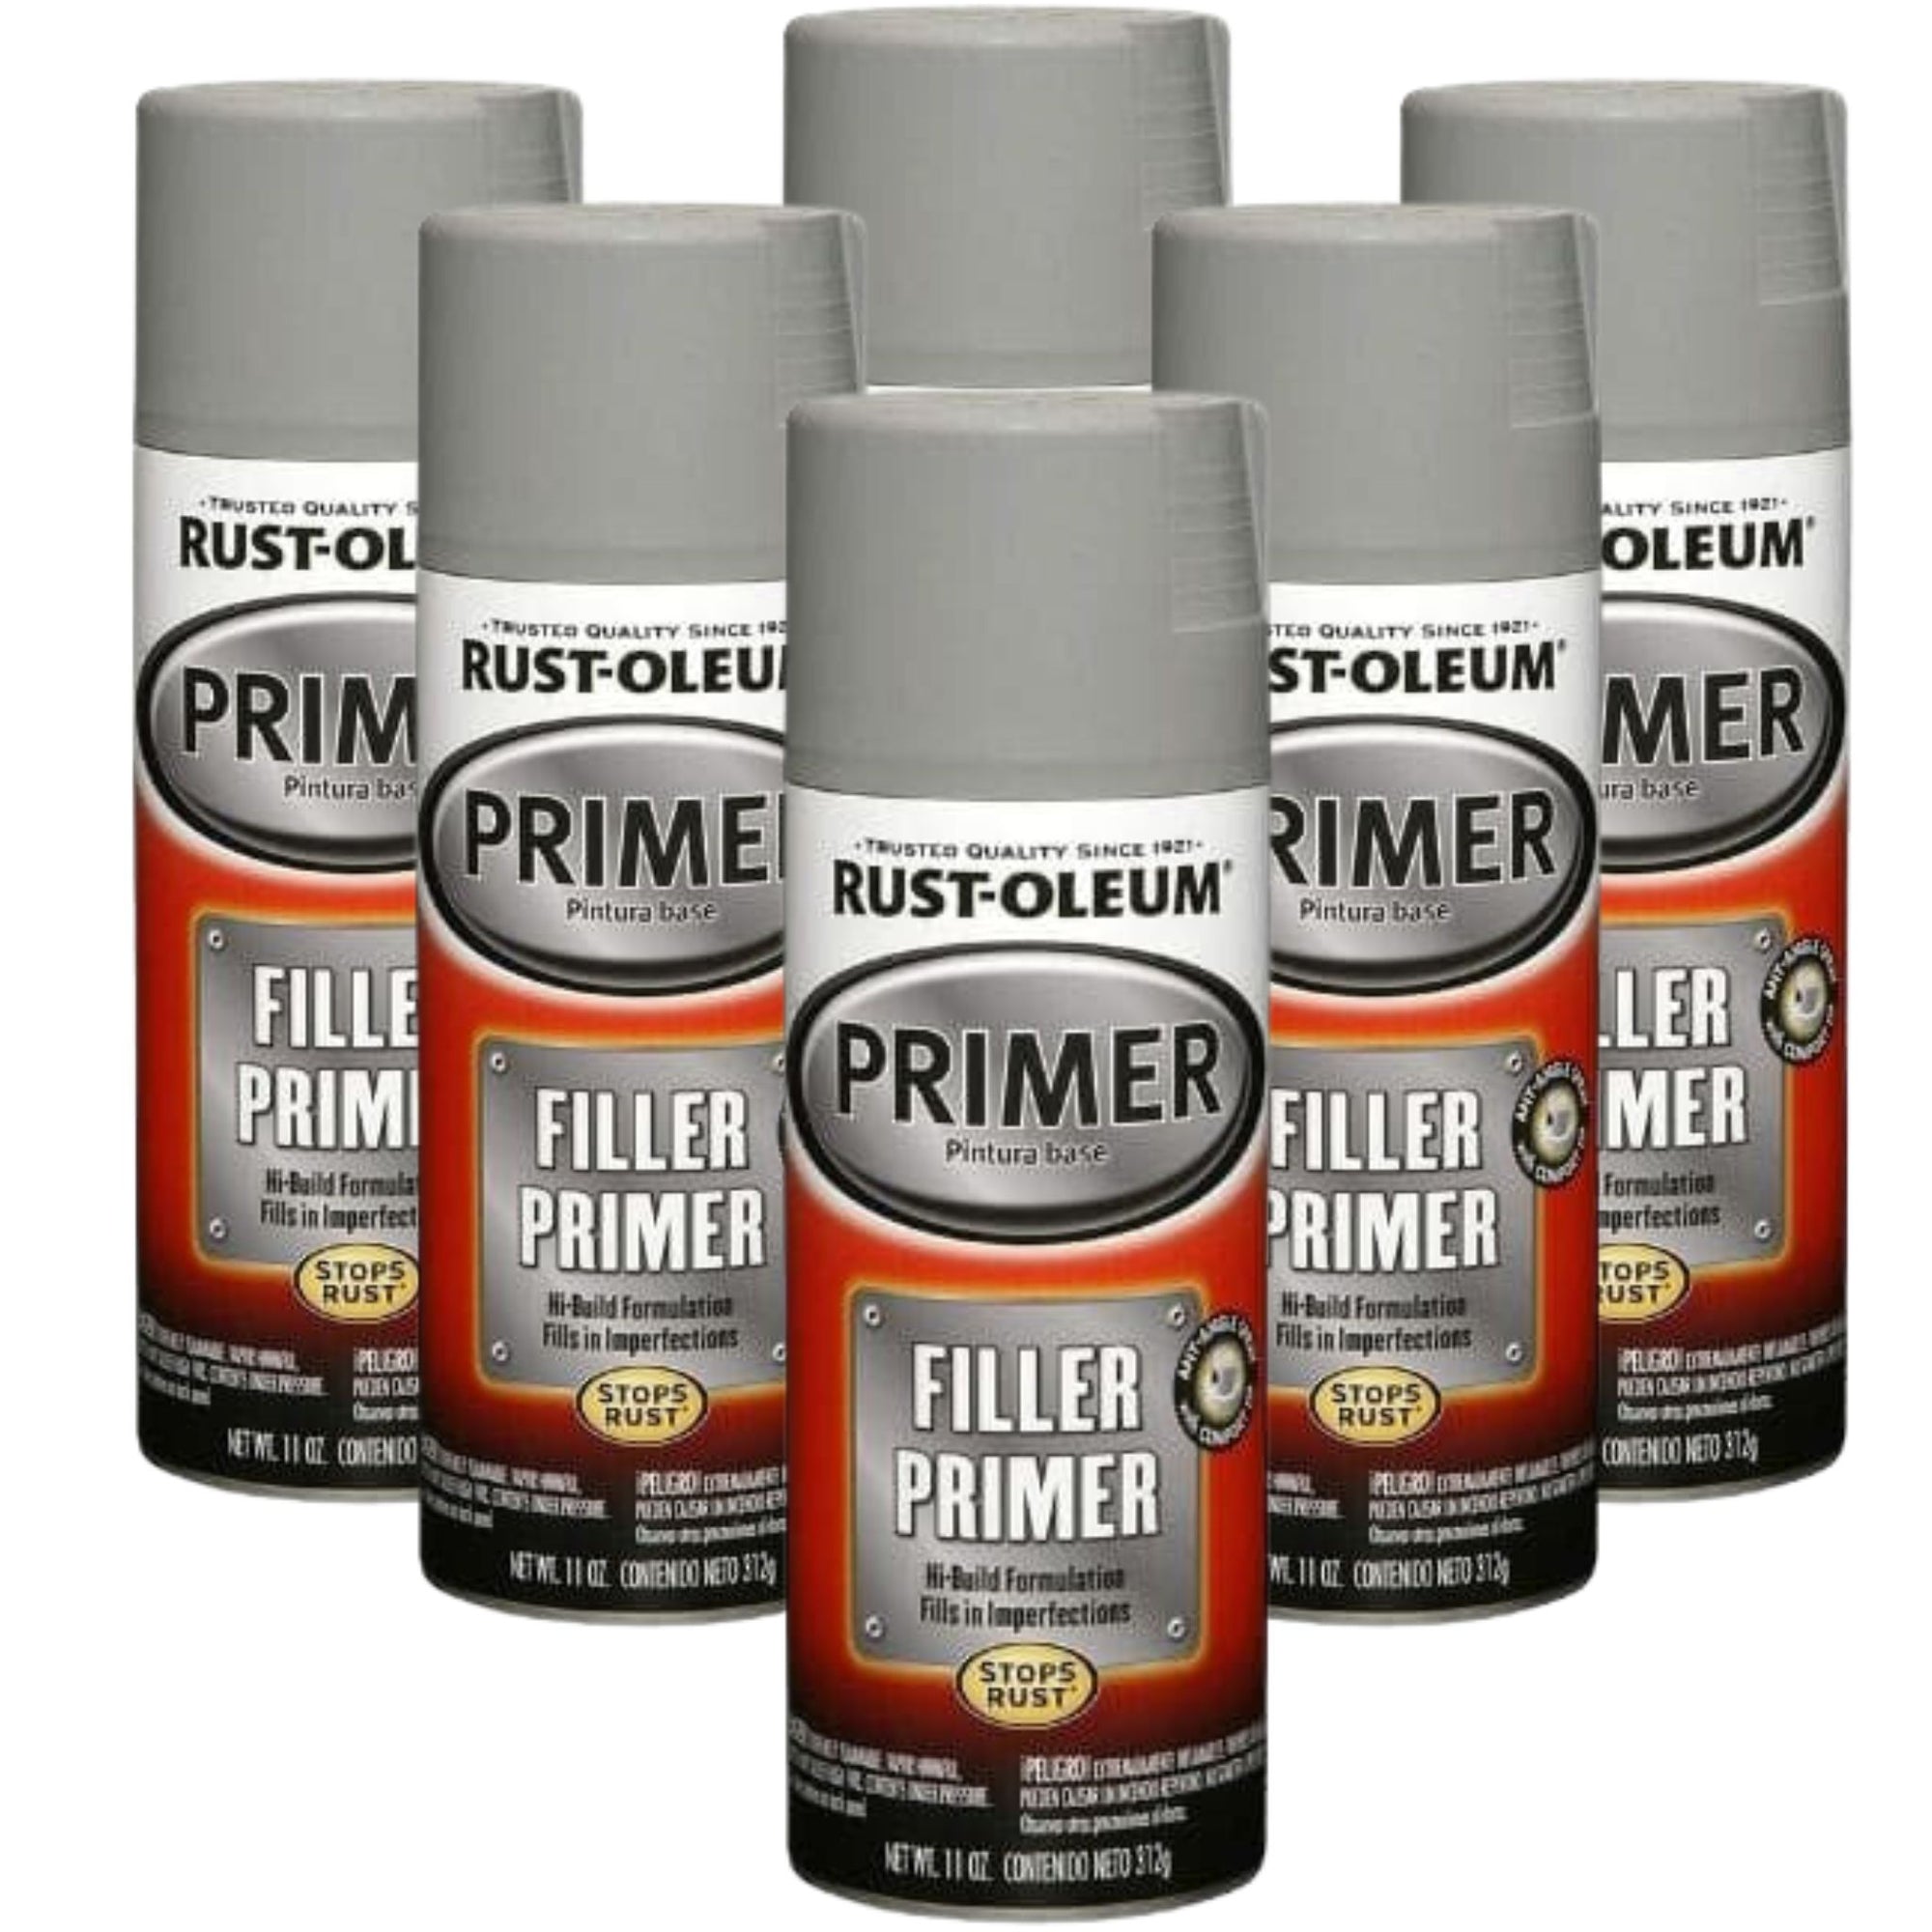 6 CANS - Rust-Oleum Automotive Filler Primer 312g Spray (249279) - South East Clearance Centre